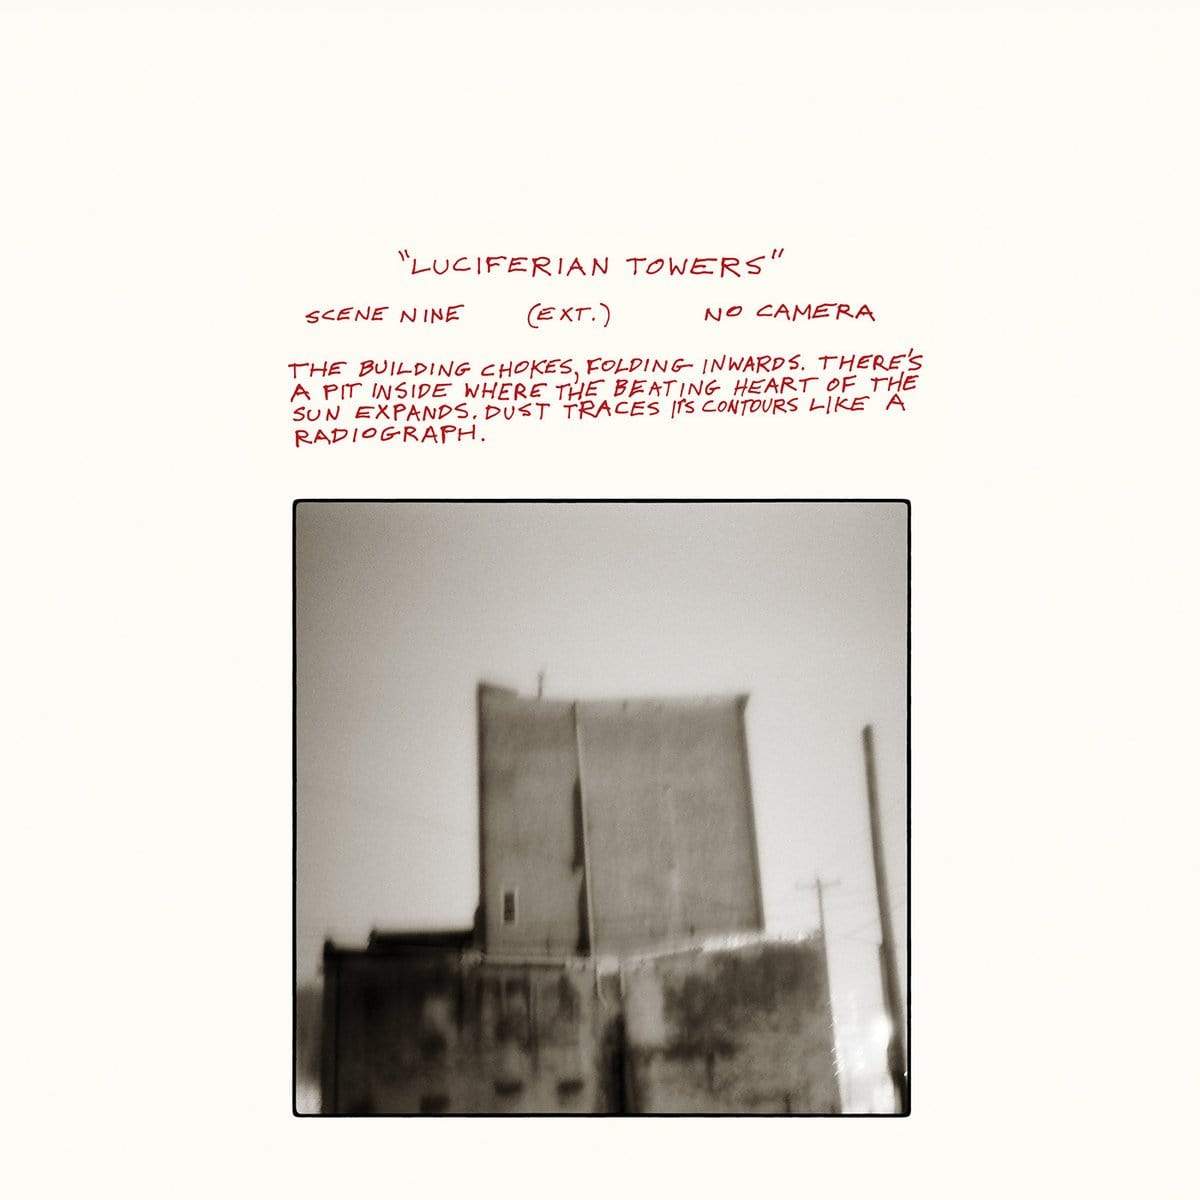 Constellation CD Godspeed You! Black Emperor &quot;Luciferian Towers&quot; CD